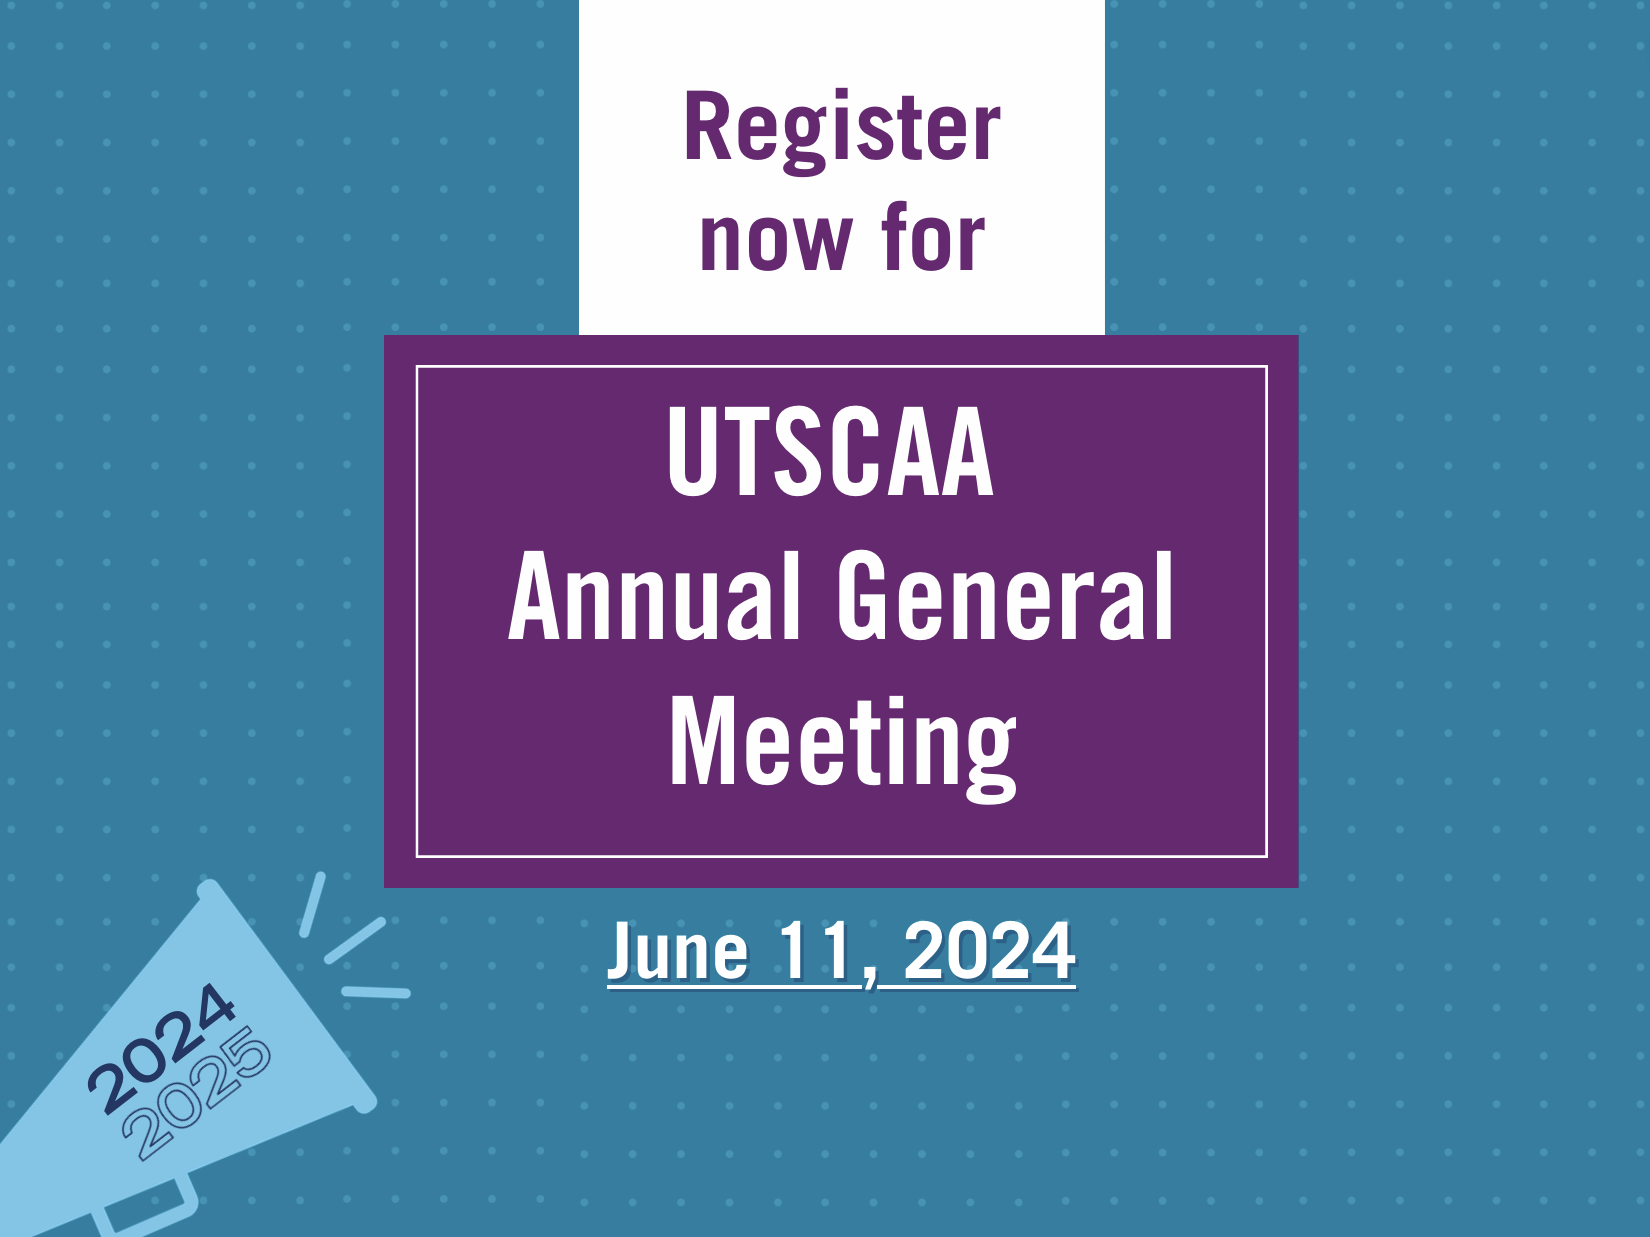 graphic saying Register now for UTSCAA Annual General Meeting - June 11, 2024